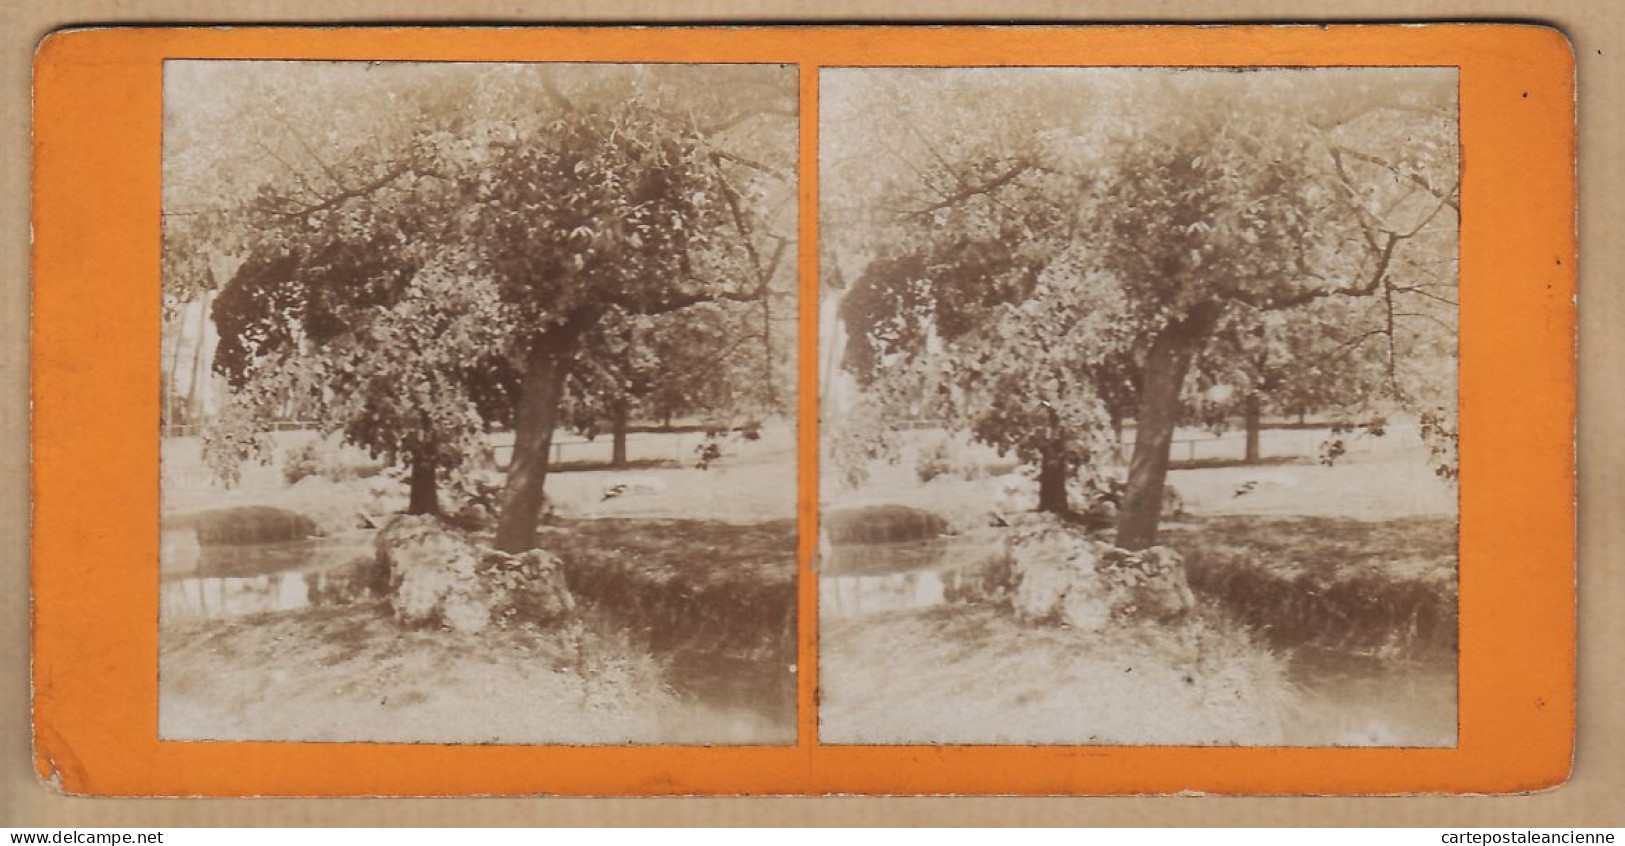 04568 / Stereo View 1890s Arbre OLIVIERS Olivier Olive Tree Photographie Botanique Flore  - Stereoscopio